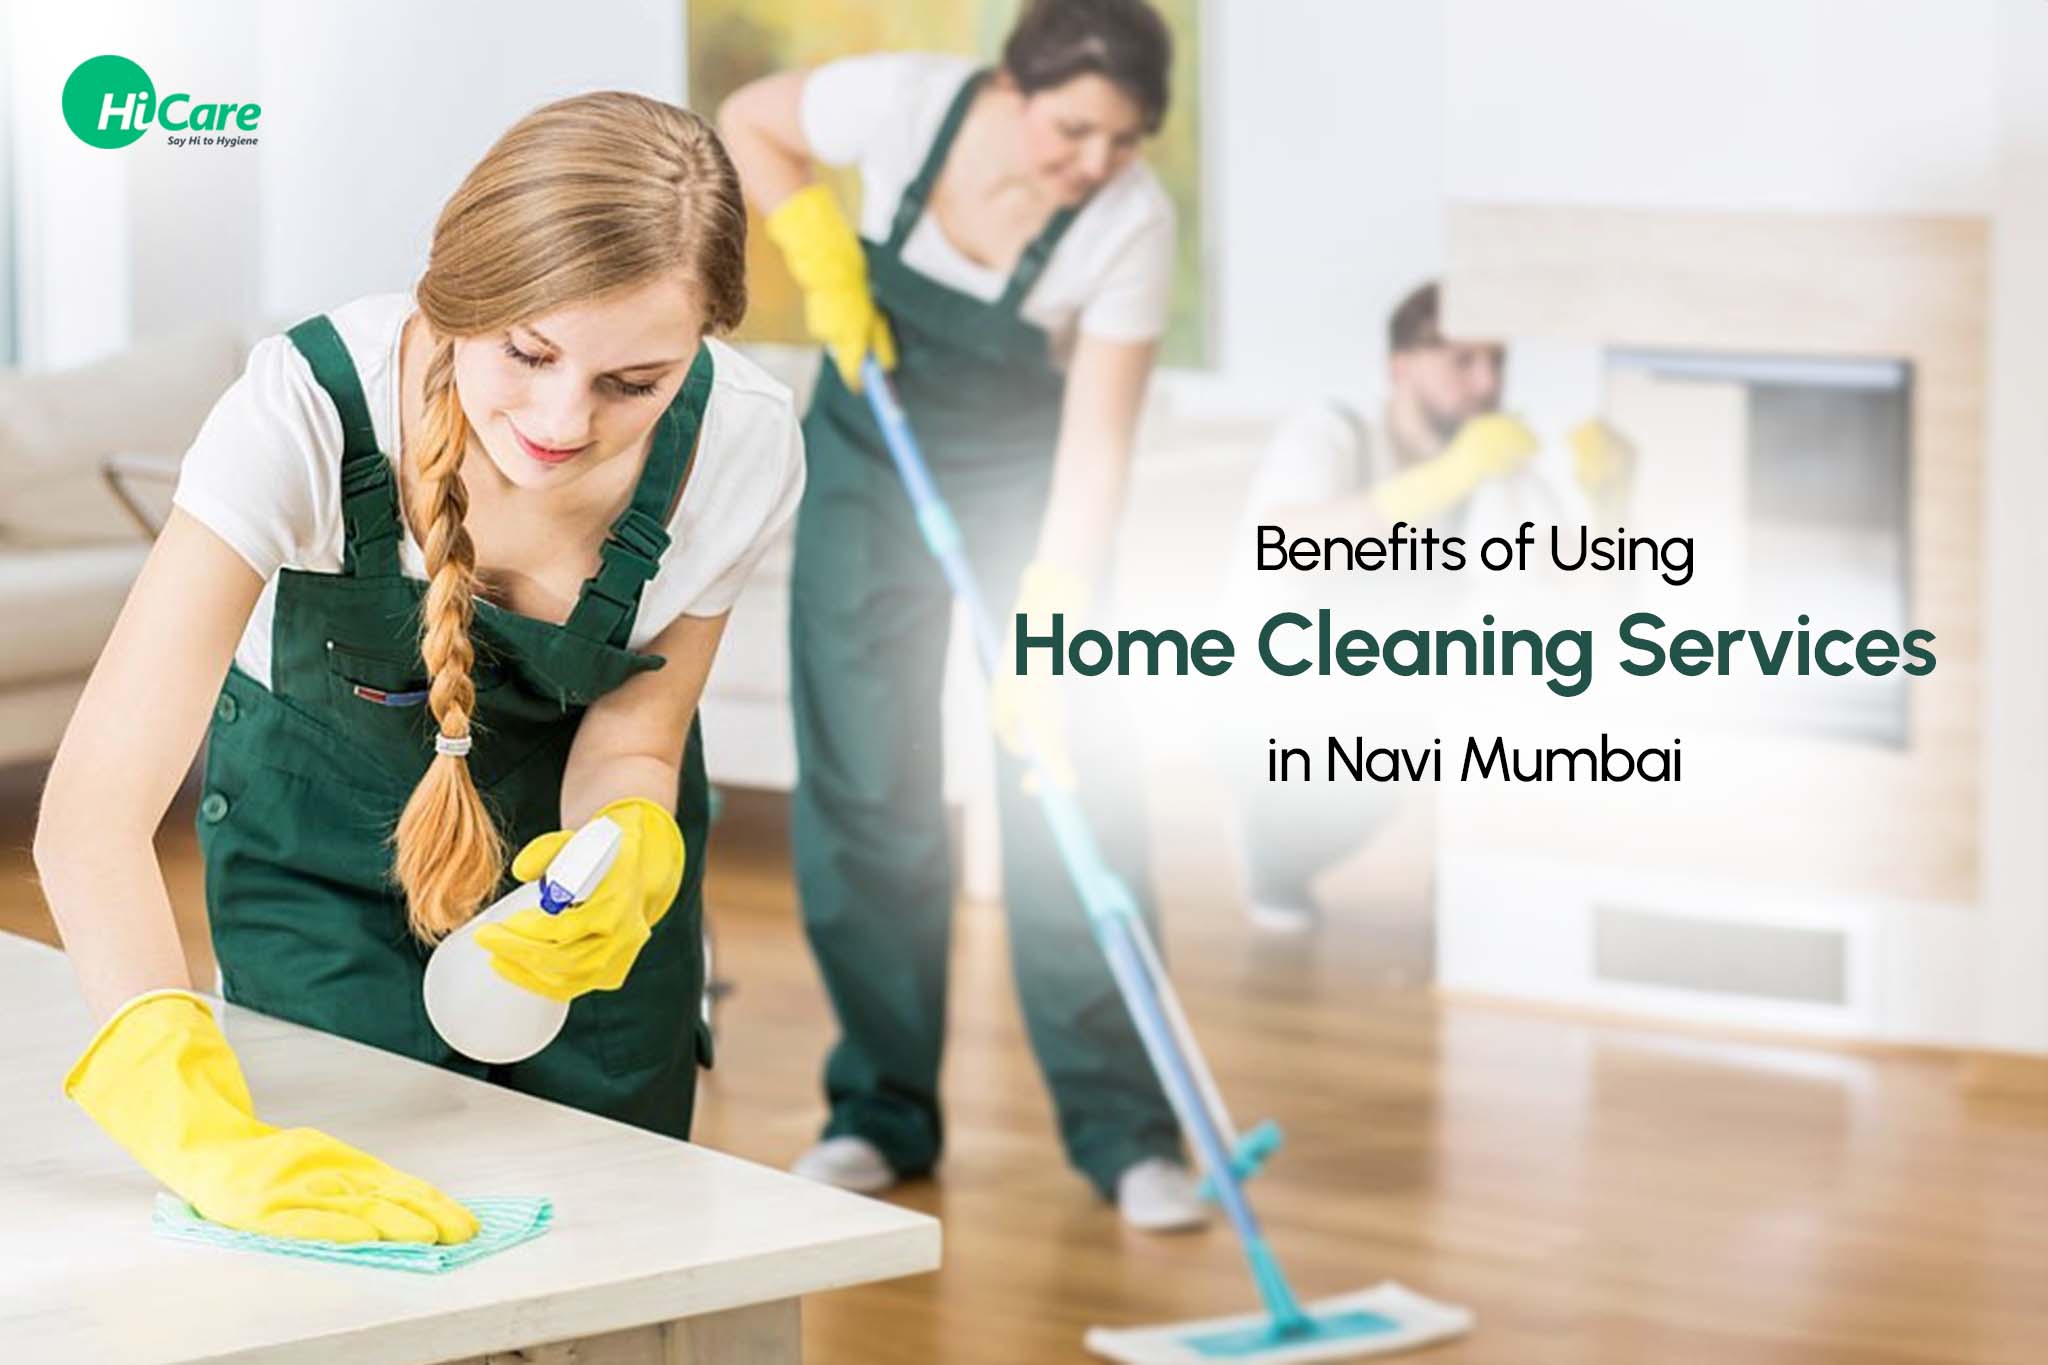 HomeCleaning